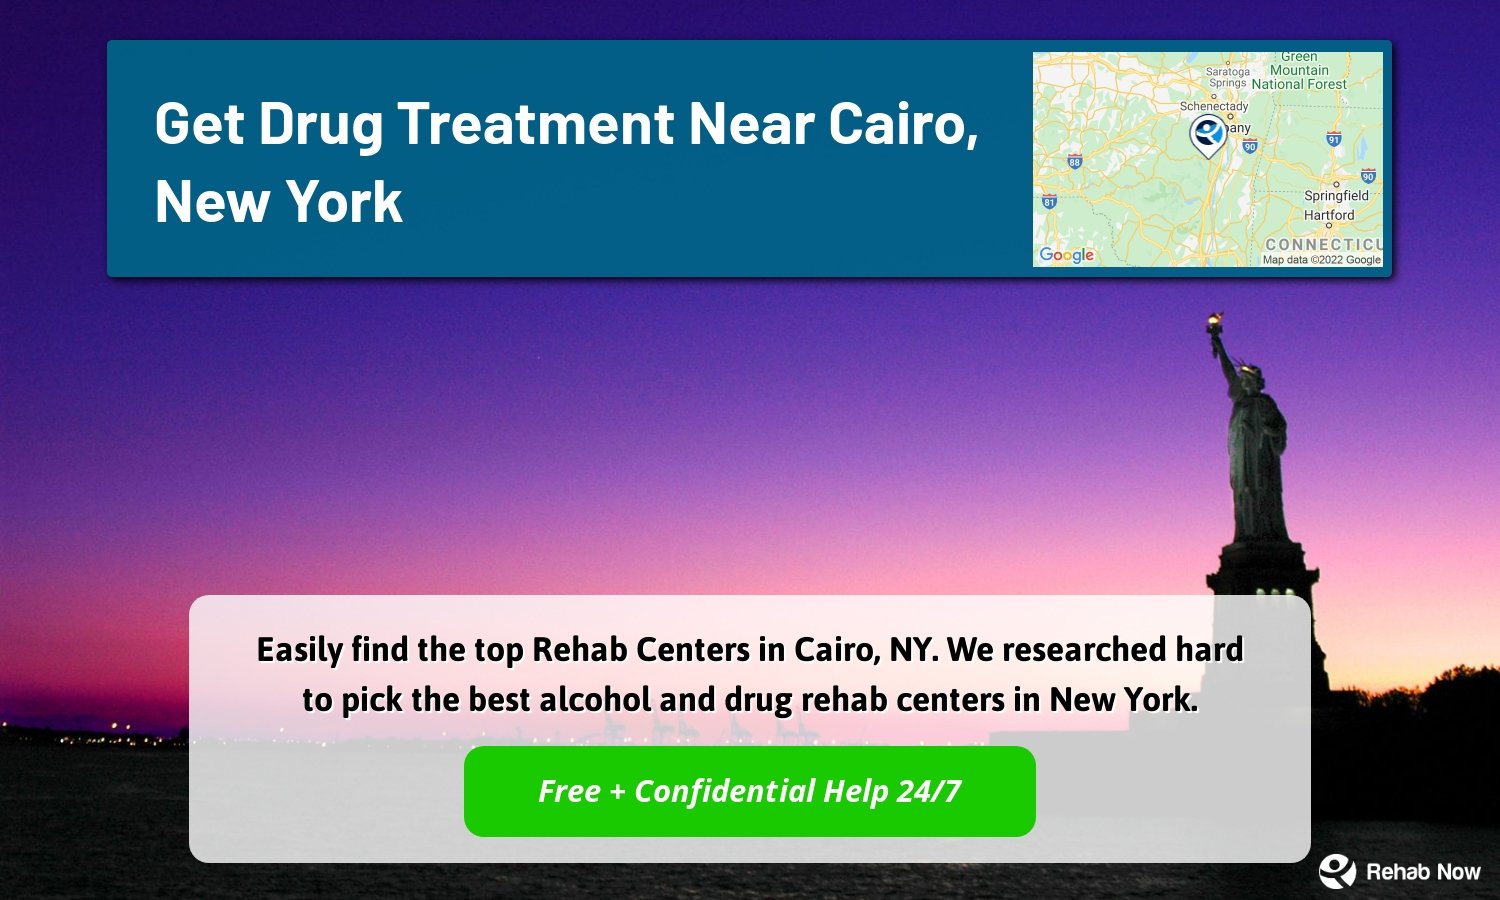 Easily find the top Rehab Centers in Cairo, NY. We researched hard to pick the best alcohol and drug rehab centers in New York.